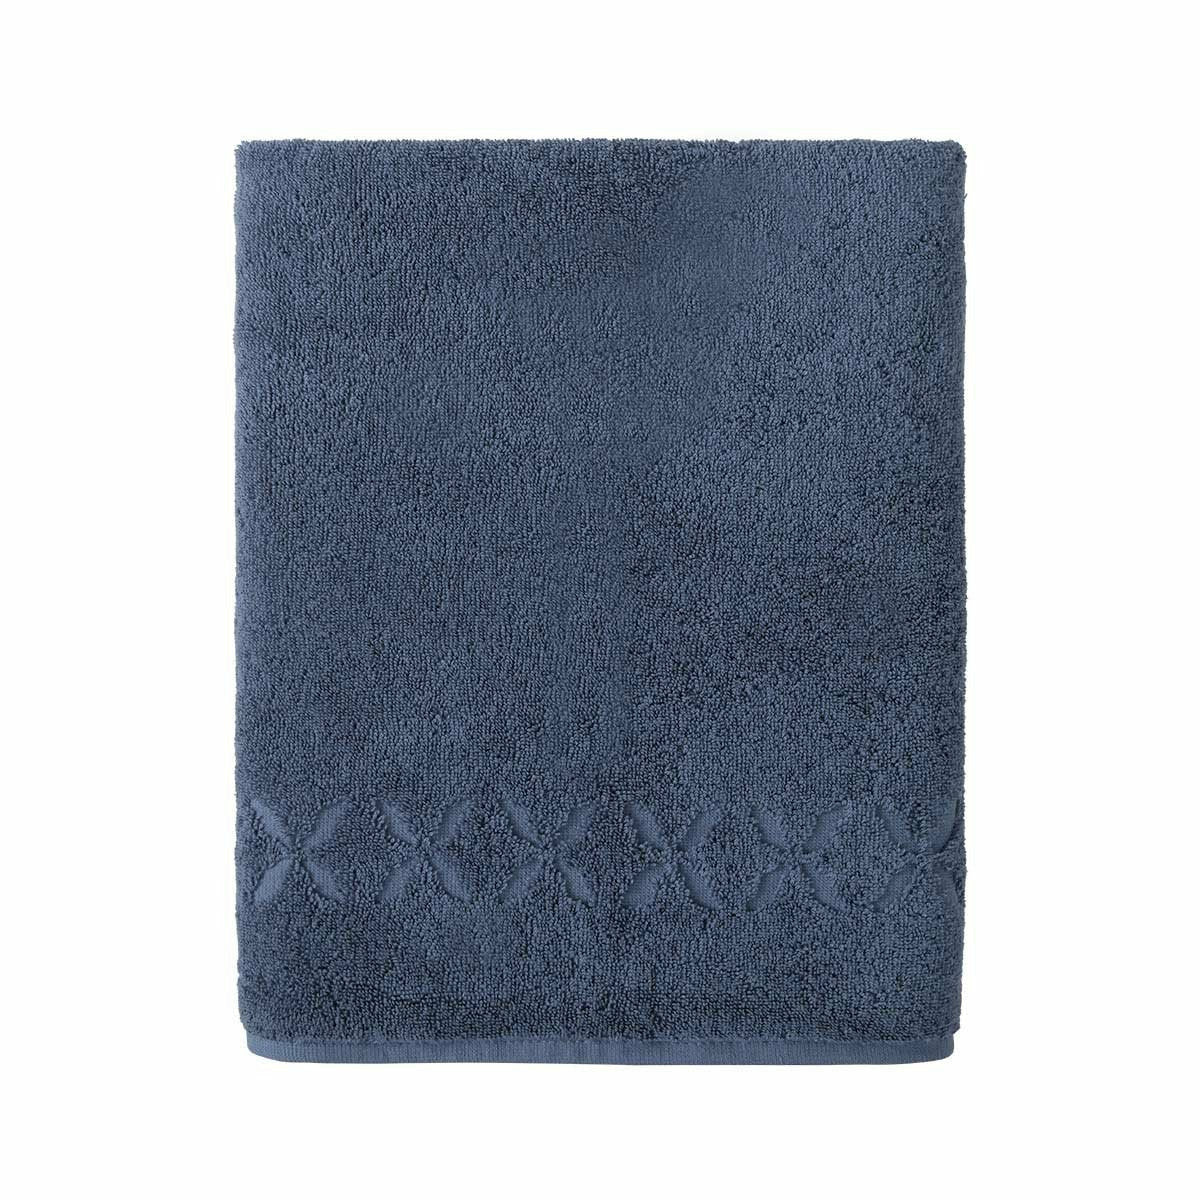 Yves Delorme Nature Bath Towels Outremer Fine Linens